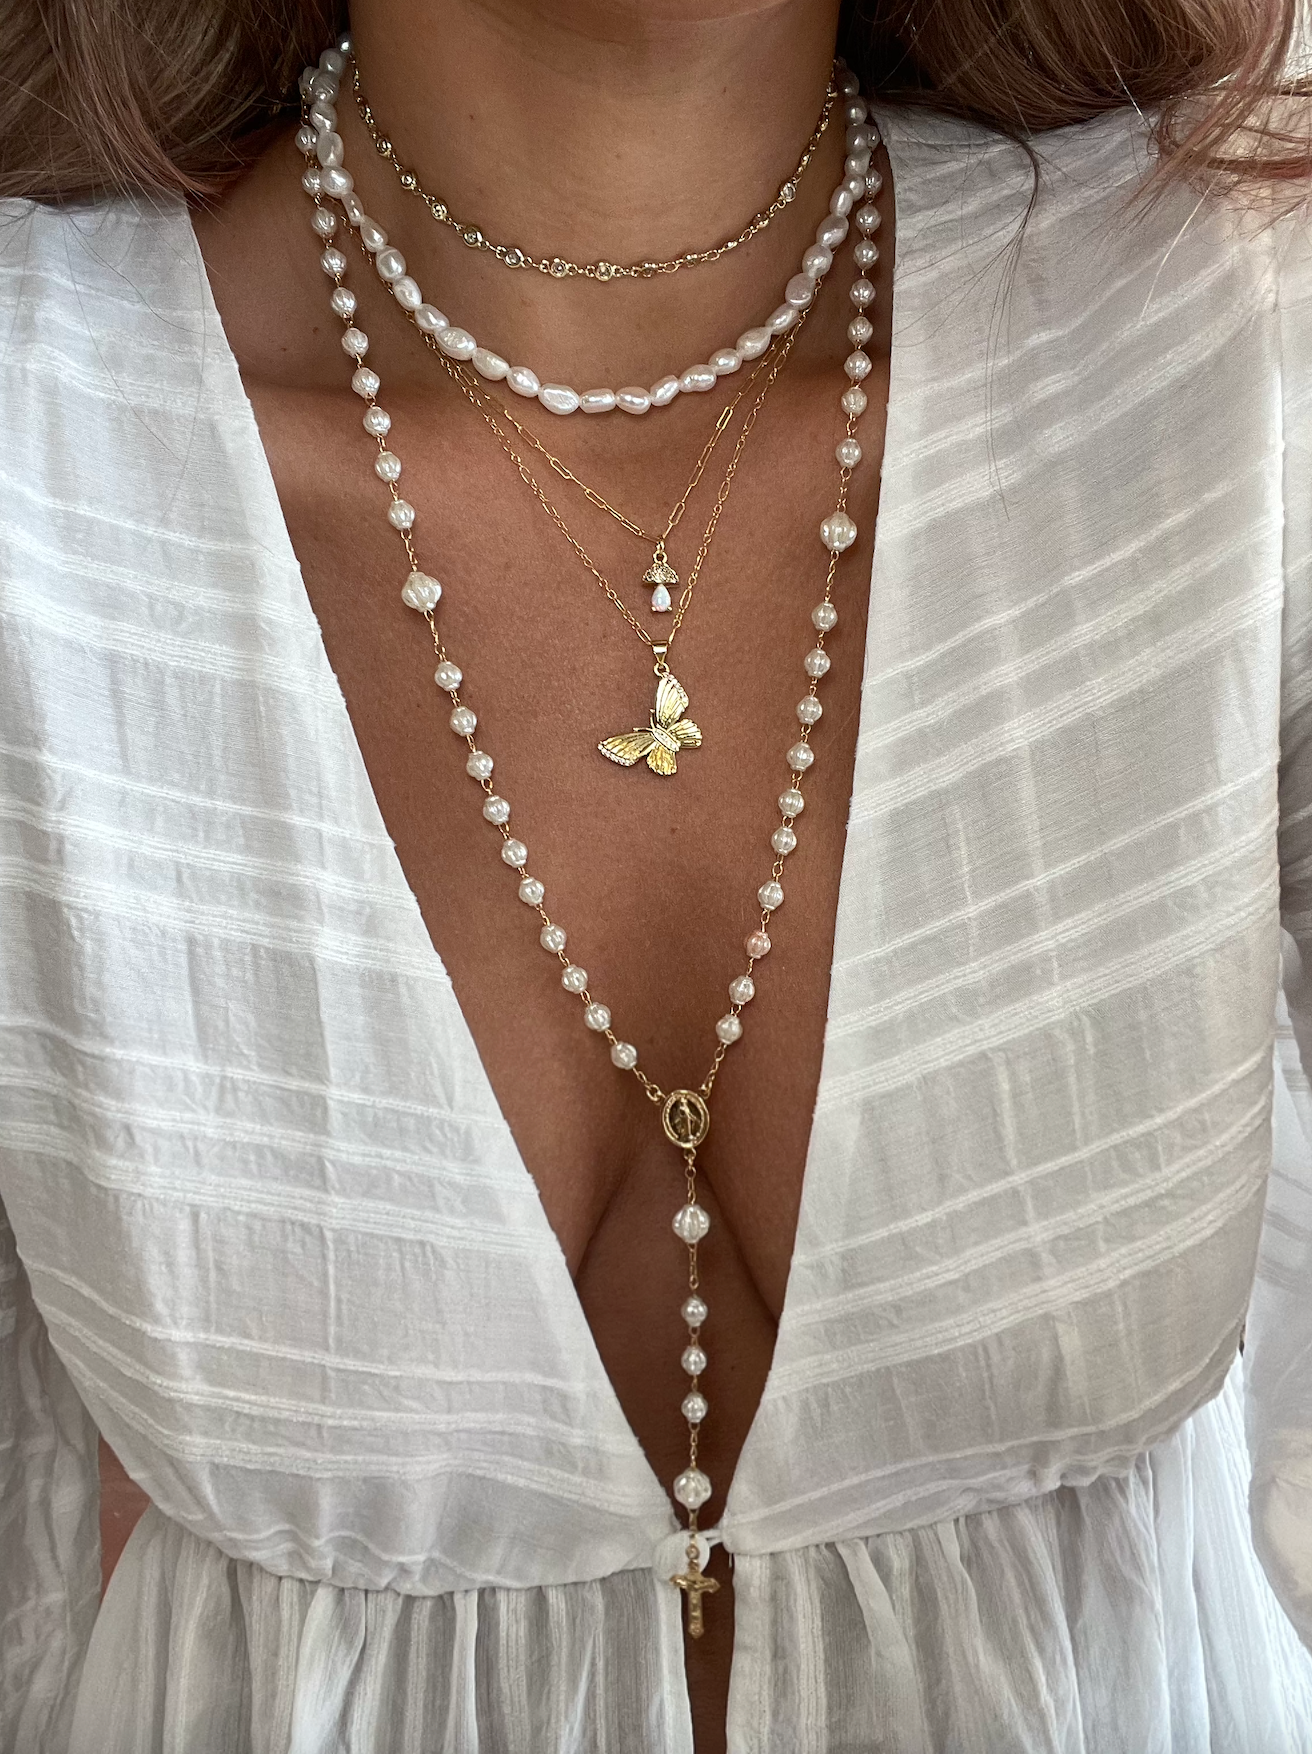 The XL Rosary Necklace